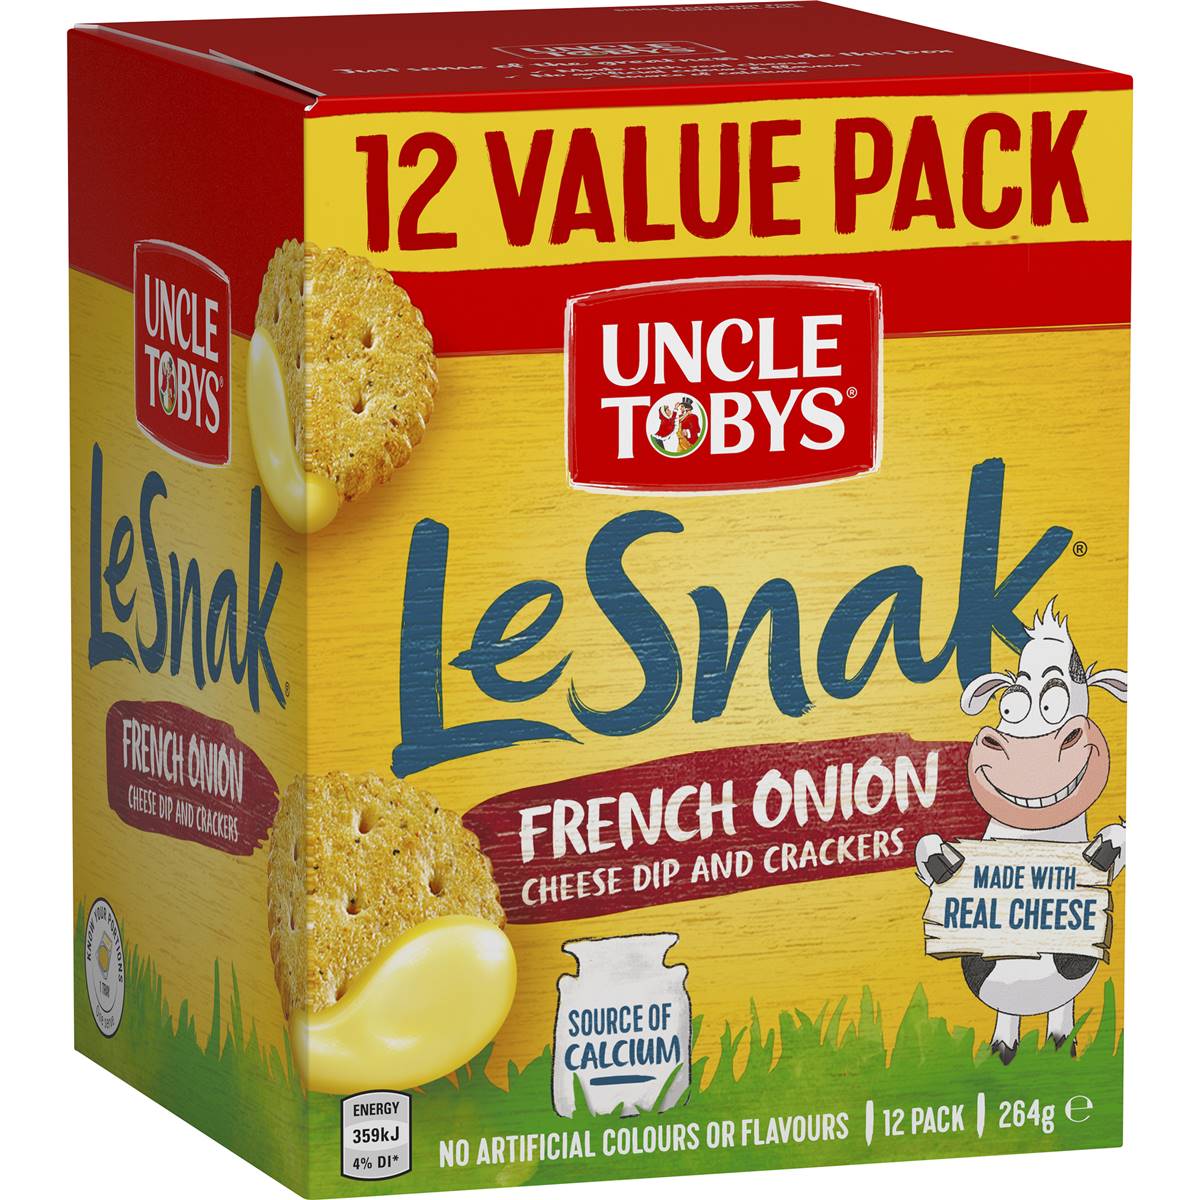 Calories in Uncle Tobys Le Snak French Onion Cheese Dip & Crackers